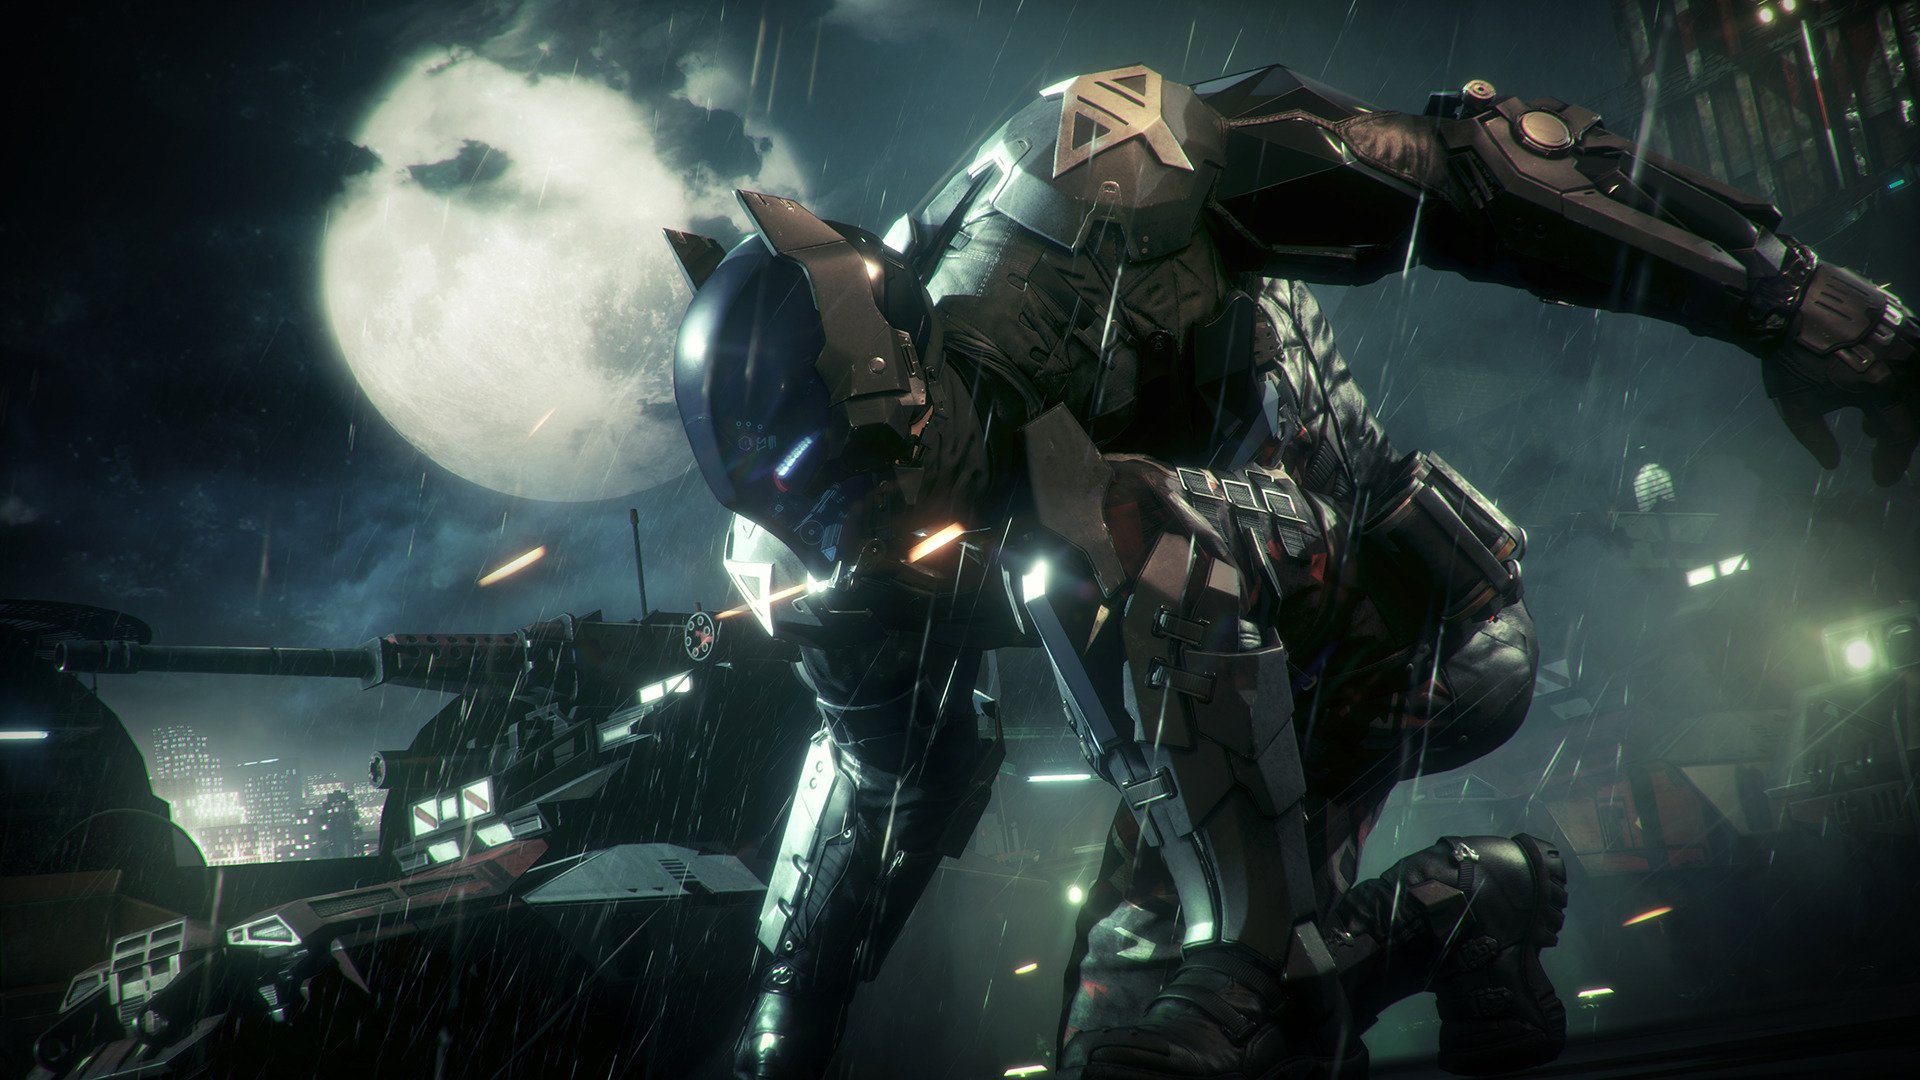 Batman: Arkham Knight for PC is seriously broken, say AMD and Nvidia users  | Ars Technica